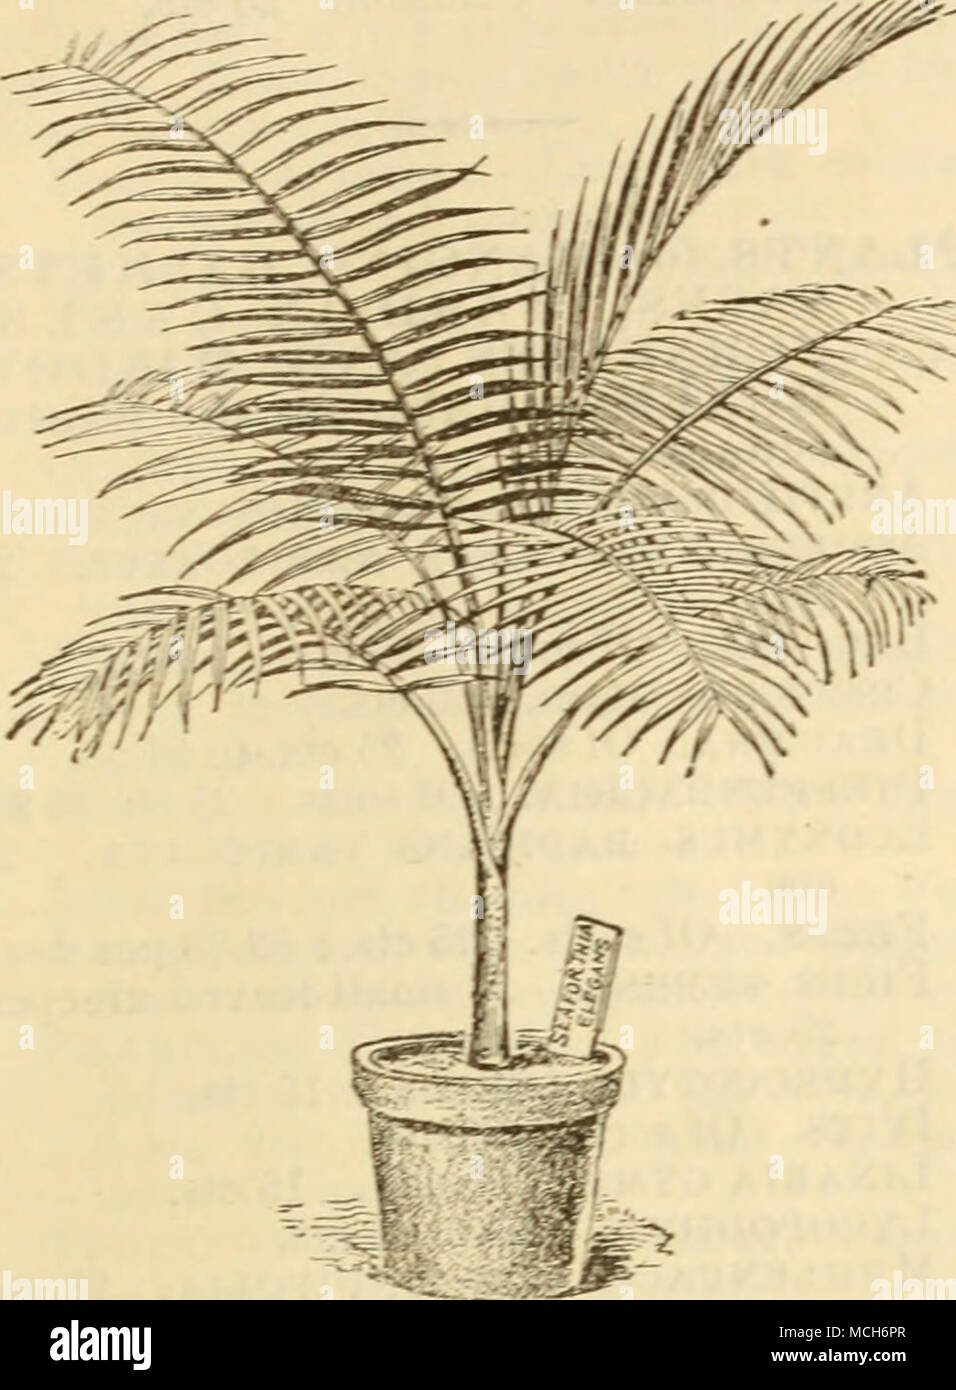 . Abeca. Lutescens. Fine yellow stems. $3 to $r;. VePwSCHaffelti. One of the most ele- gant varieties. $3 to $10. Cham.erops excelsa. a handsome fan palm. .$1 to .*.3. GlESBRECHTI. $3. HUMULIS. -SS. Cocos ^VEDDELLIA^â¢A. One of the most graceful i^alras. $5. CORYPIIA AUSTKALIS. (Australian Fan Palm.} 50 cts. to $3. CycaS BEVOLUTA. (Sago Palm.) $10. Lataxia Boebonica. (Chinese Fan Palm.) One of the handsomest, ou cts. to .$5. LivisTONA Oliv^formis. .$5. OrEODOXA KEGIA. :i3. Phcexix dactylifera. (The Date Palm.) $2.50 to $8. ItECLIXATA. .$S. Sylvestris. $3 to $10. Seaforthia Elegans. Of easy cul Stock Photo